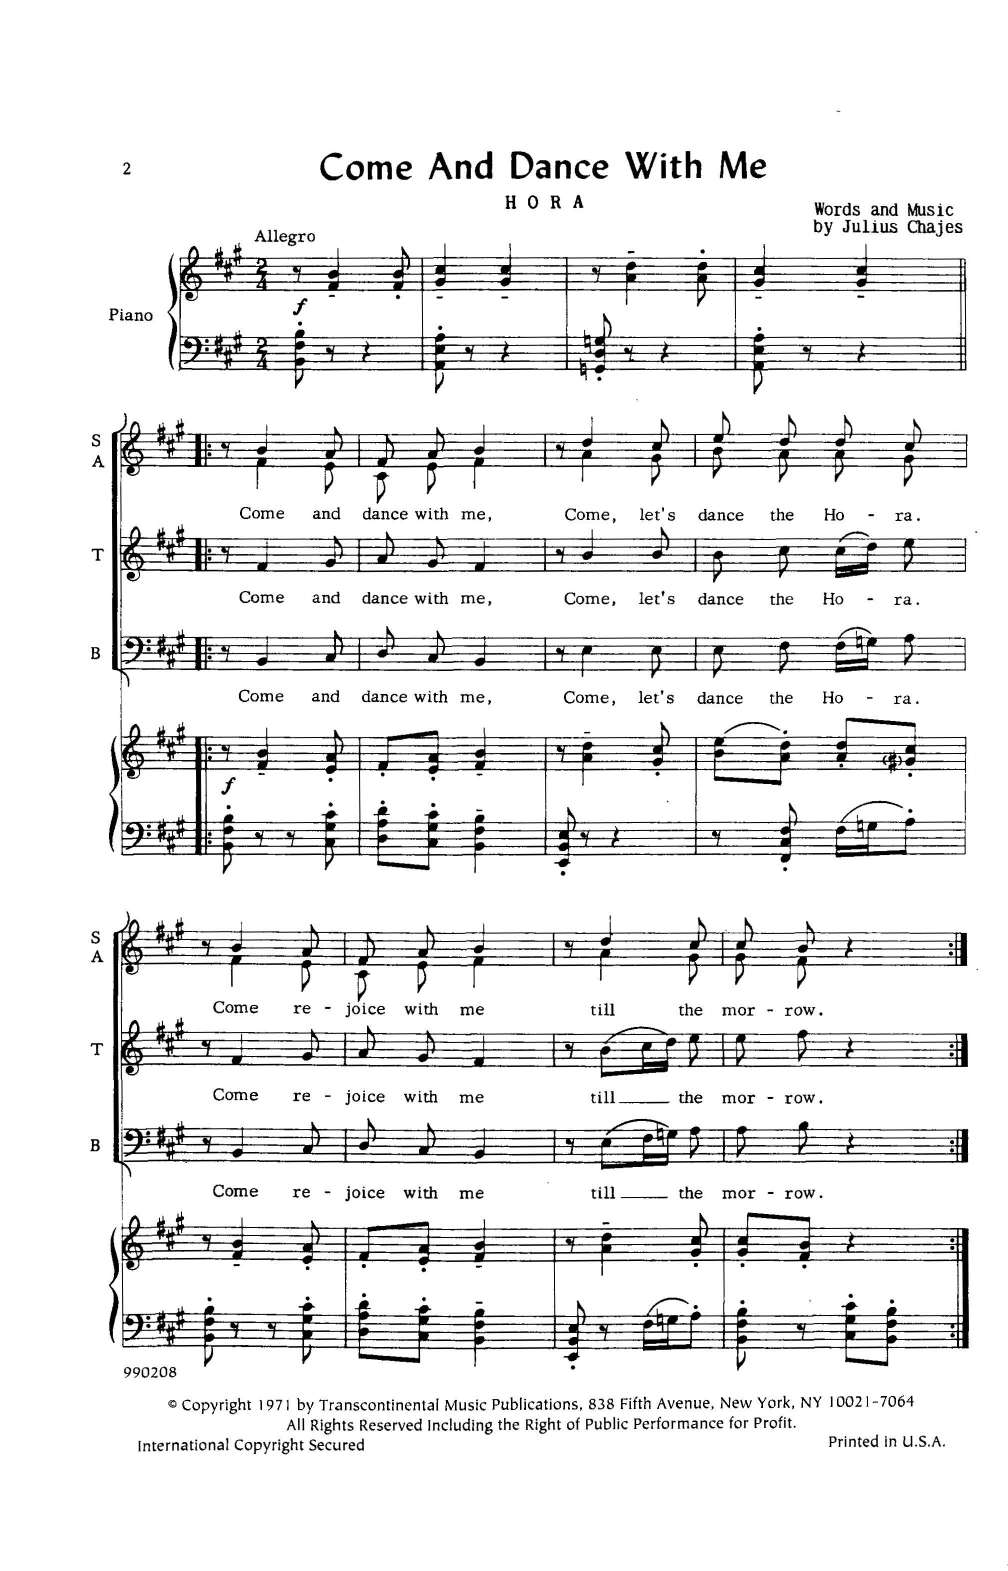 Download Julius Chajes Come And Dance With Me (Hora) Sheet Music